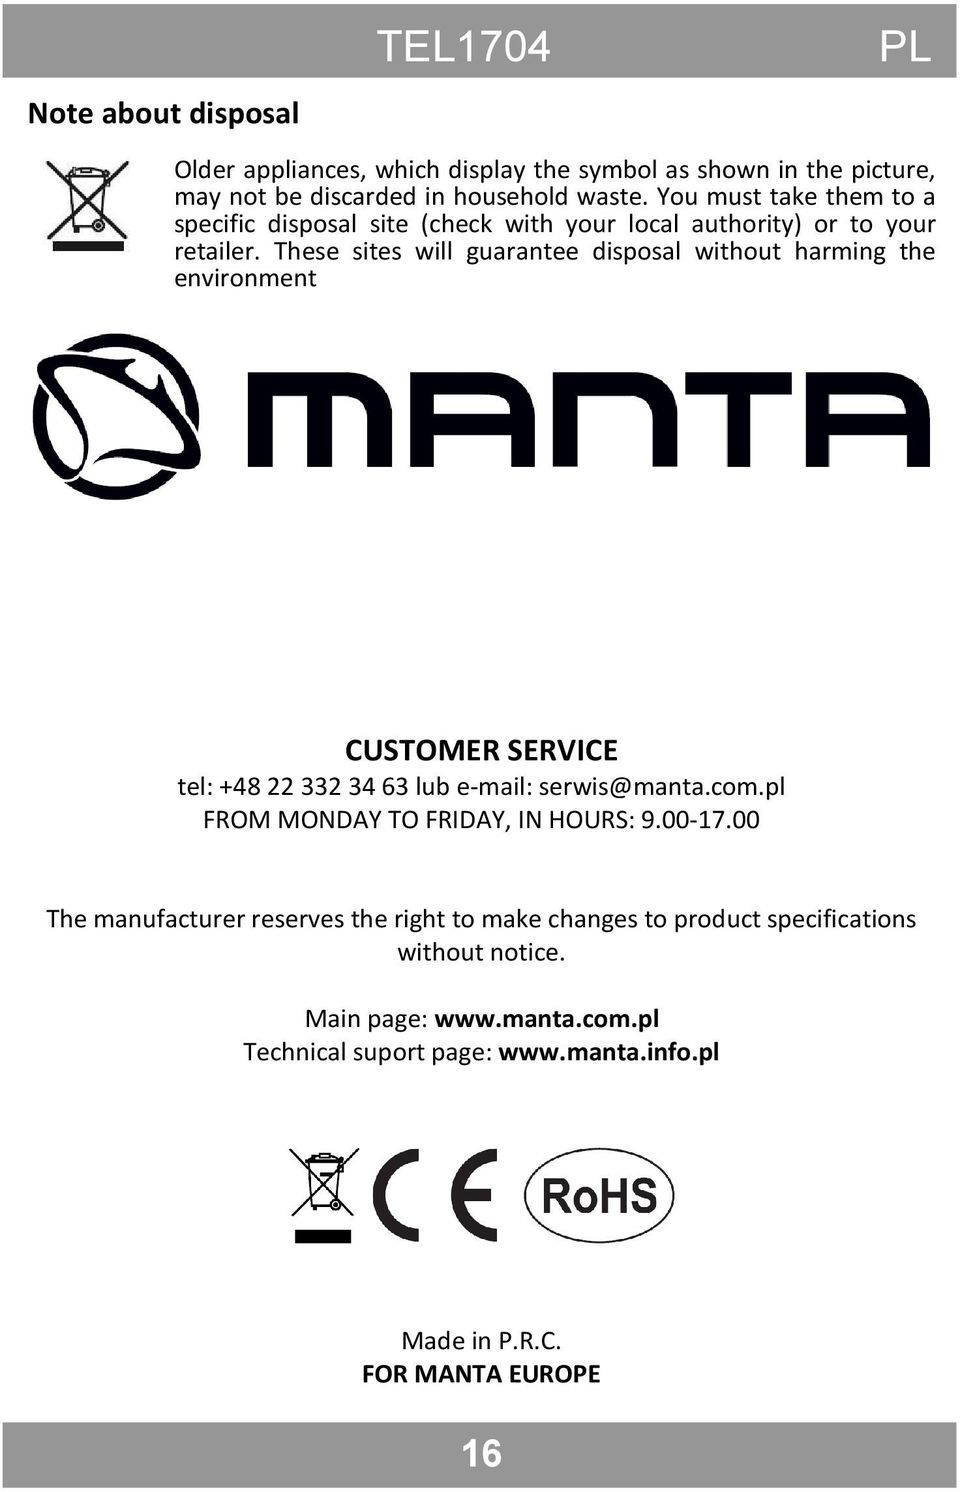 These sites will guarantee disposal without harming the environment CUSTOMER SERVICE tel: +48 22 332 34 63 lub e-mail: serwis@manta.com.